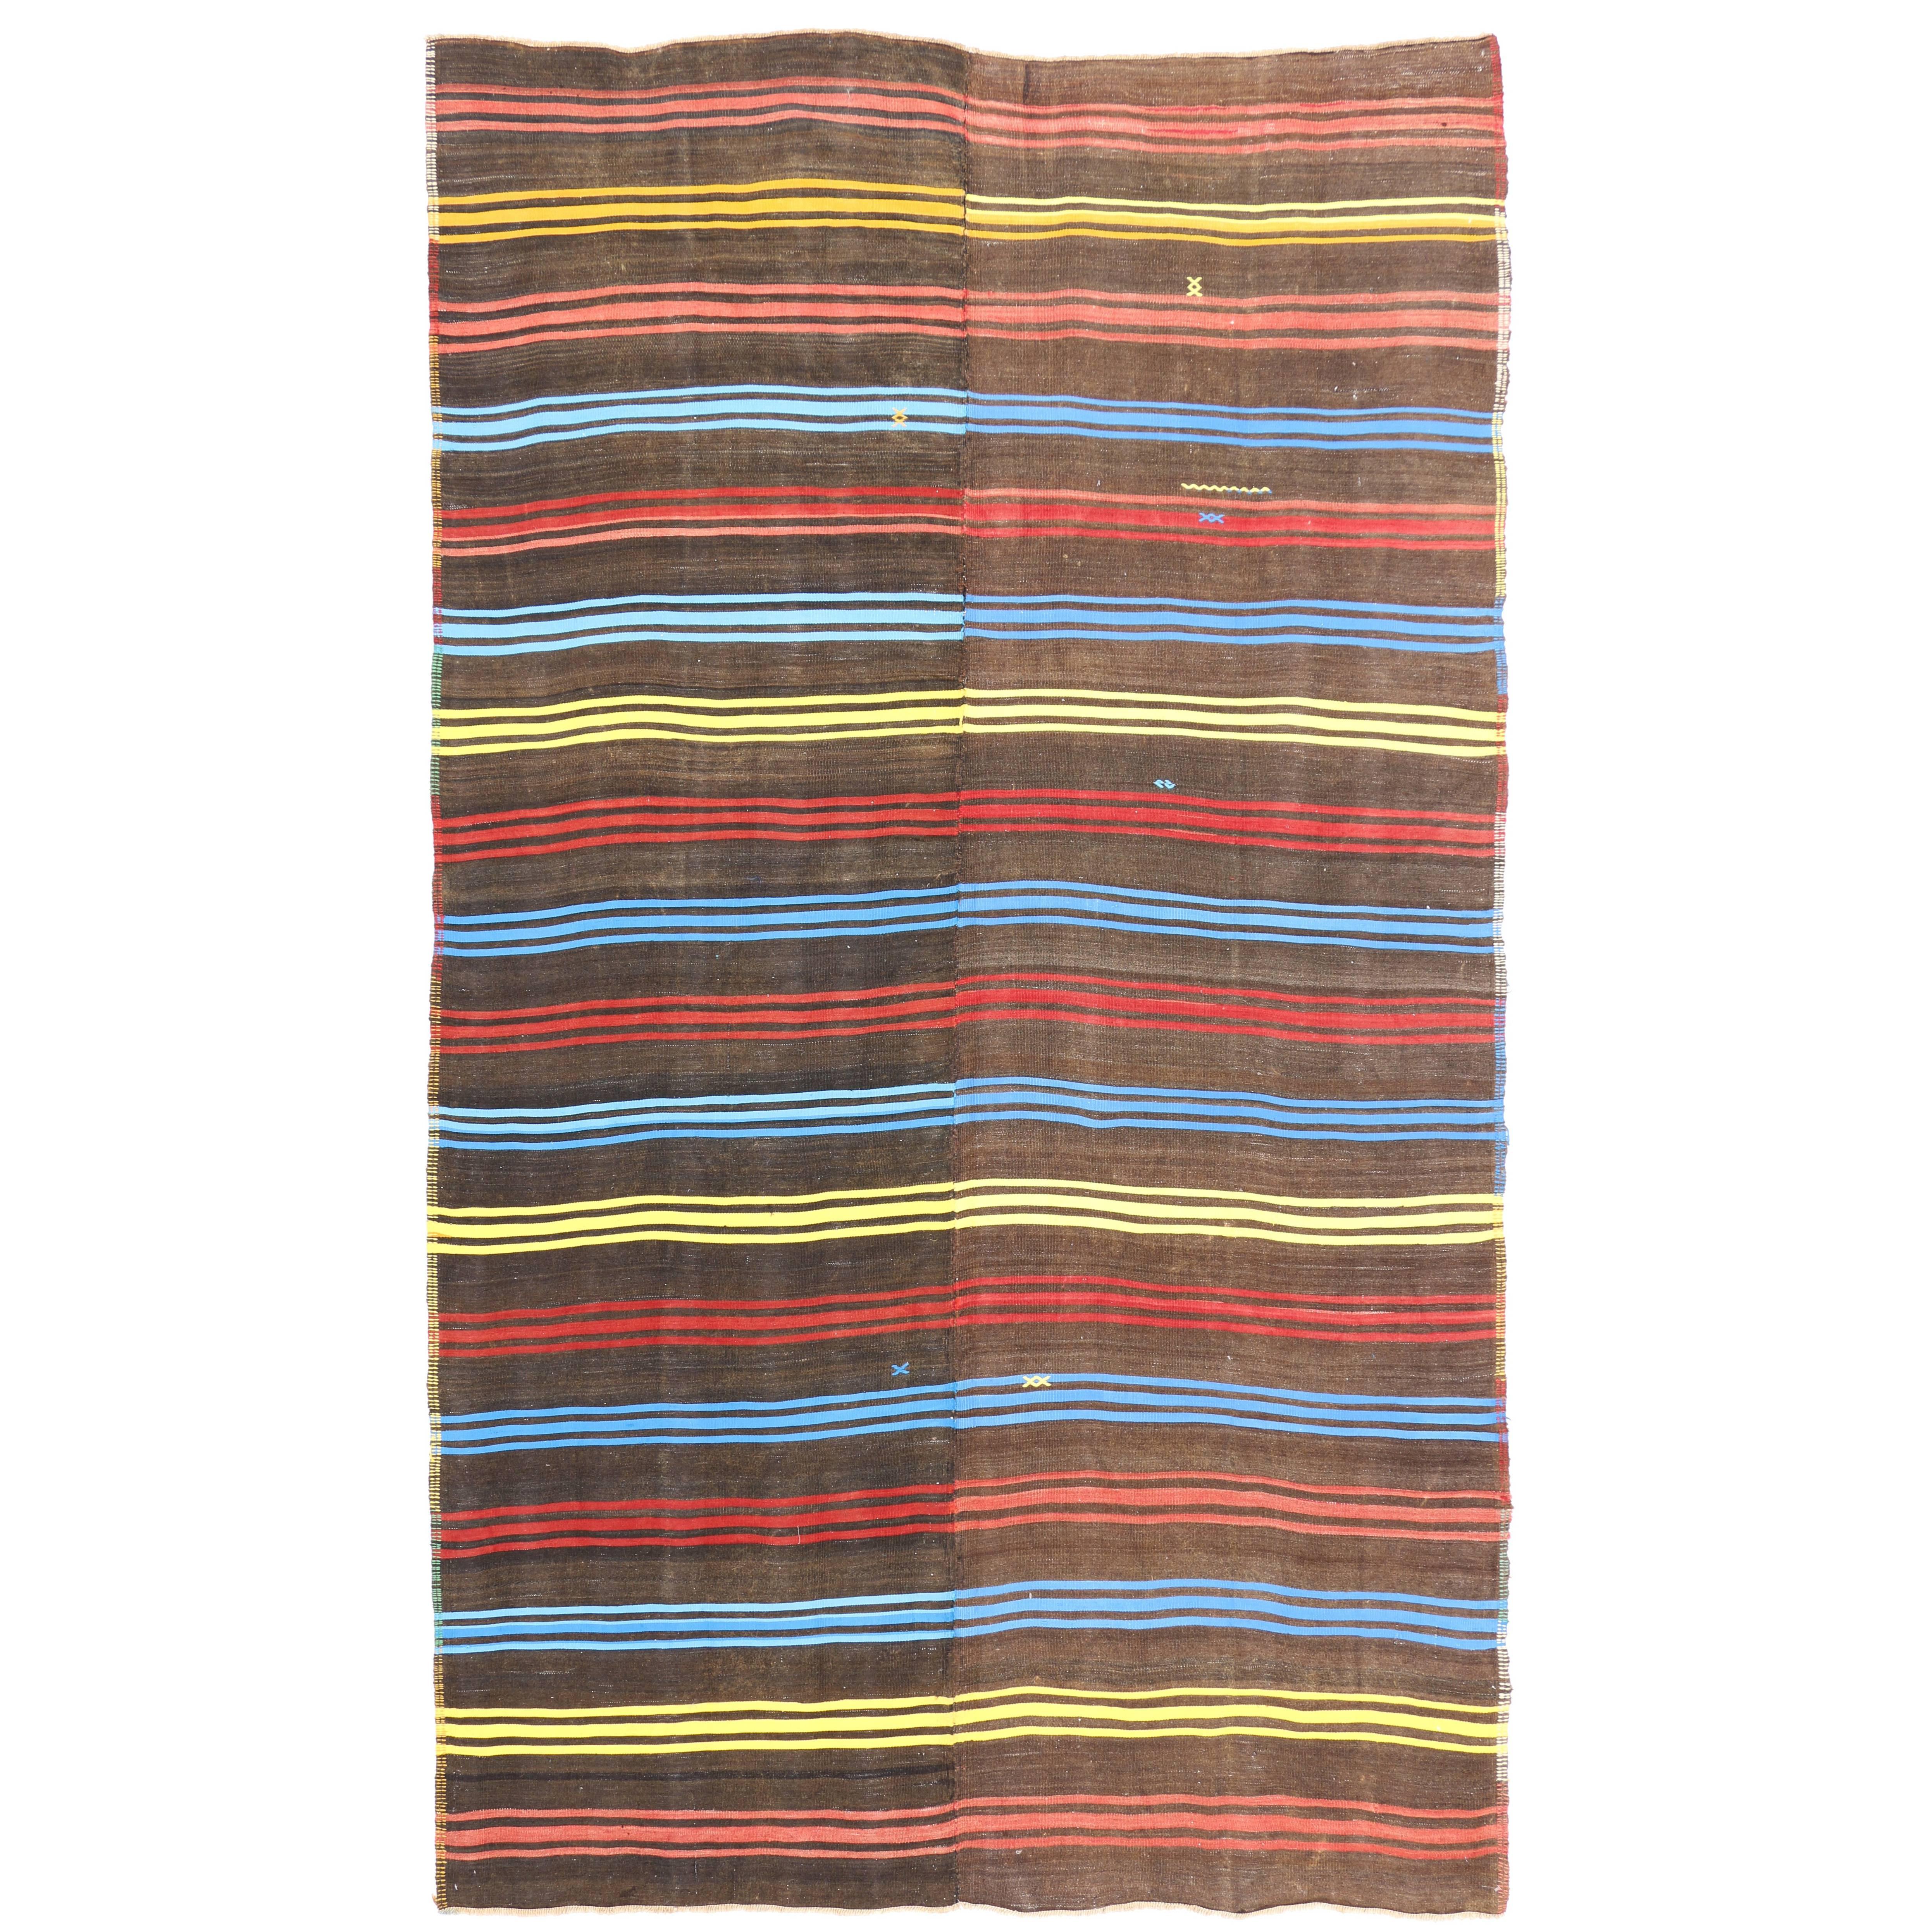 Vintage Turkish Kilim Rug with Colorful Bayadere Stripes with Modern Cabin Style